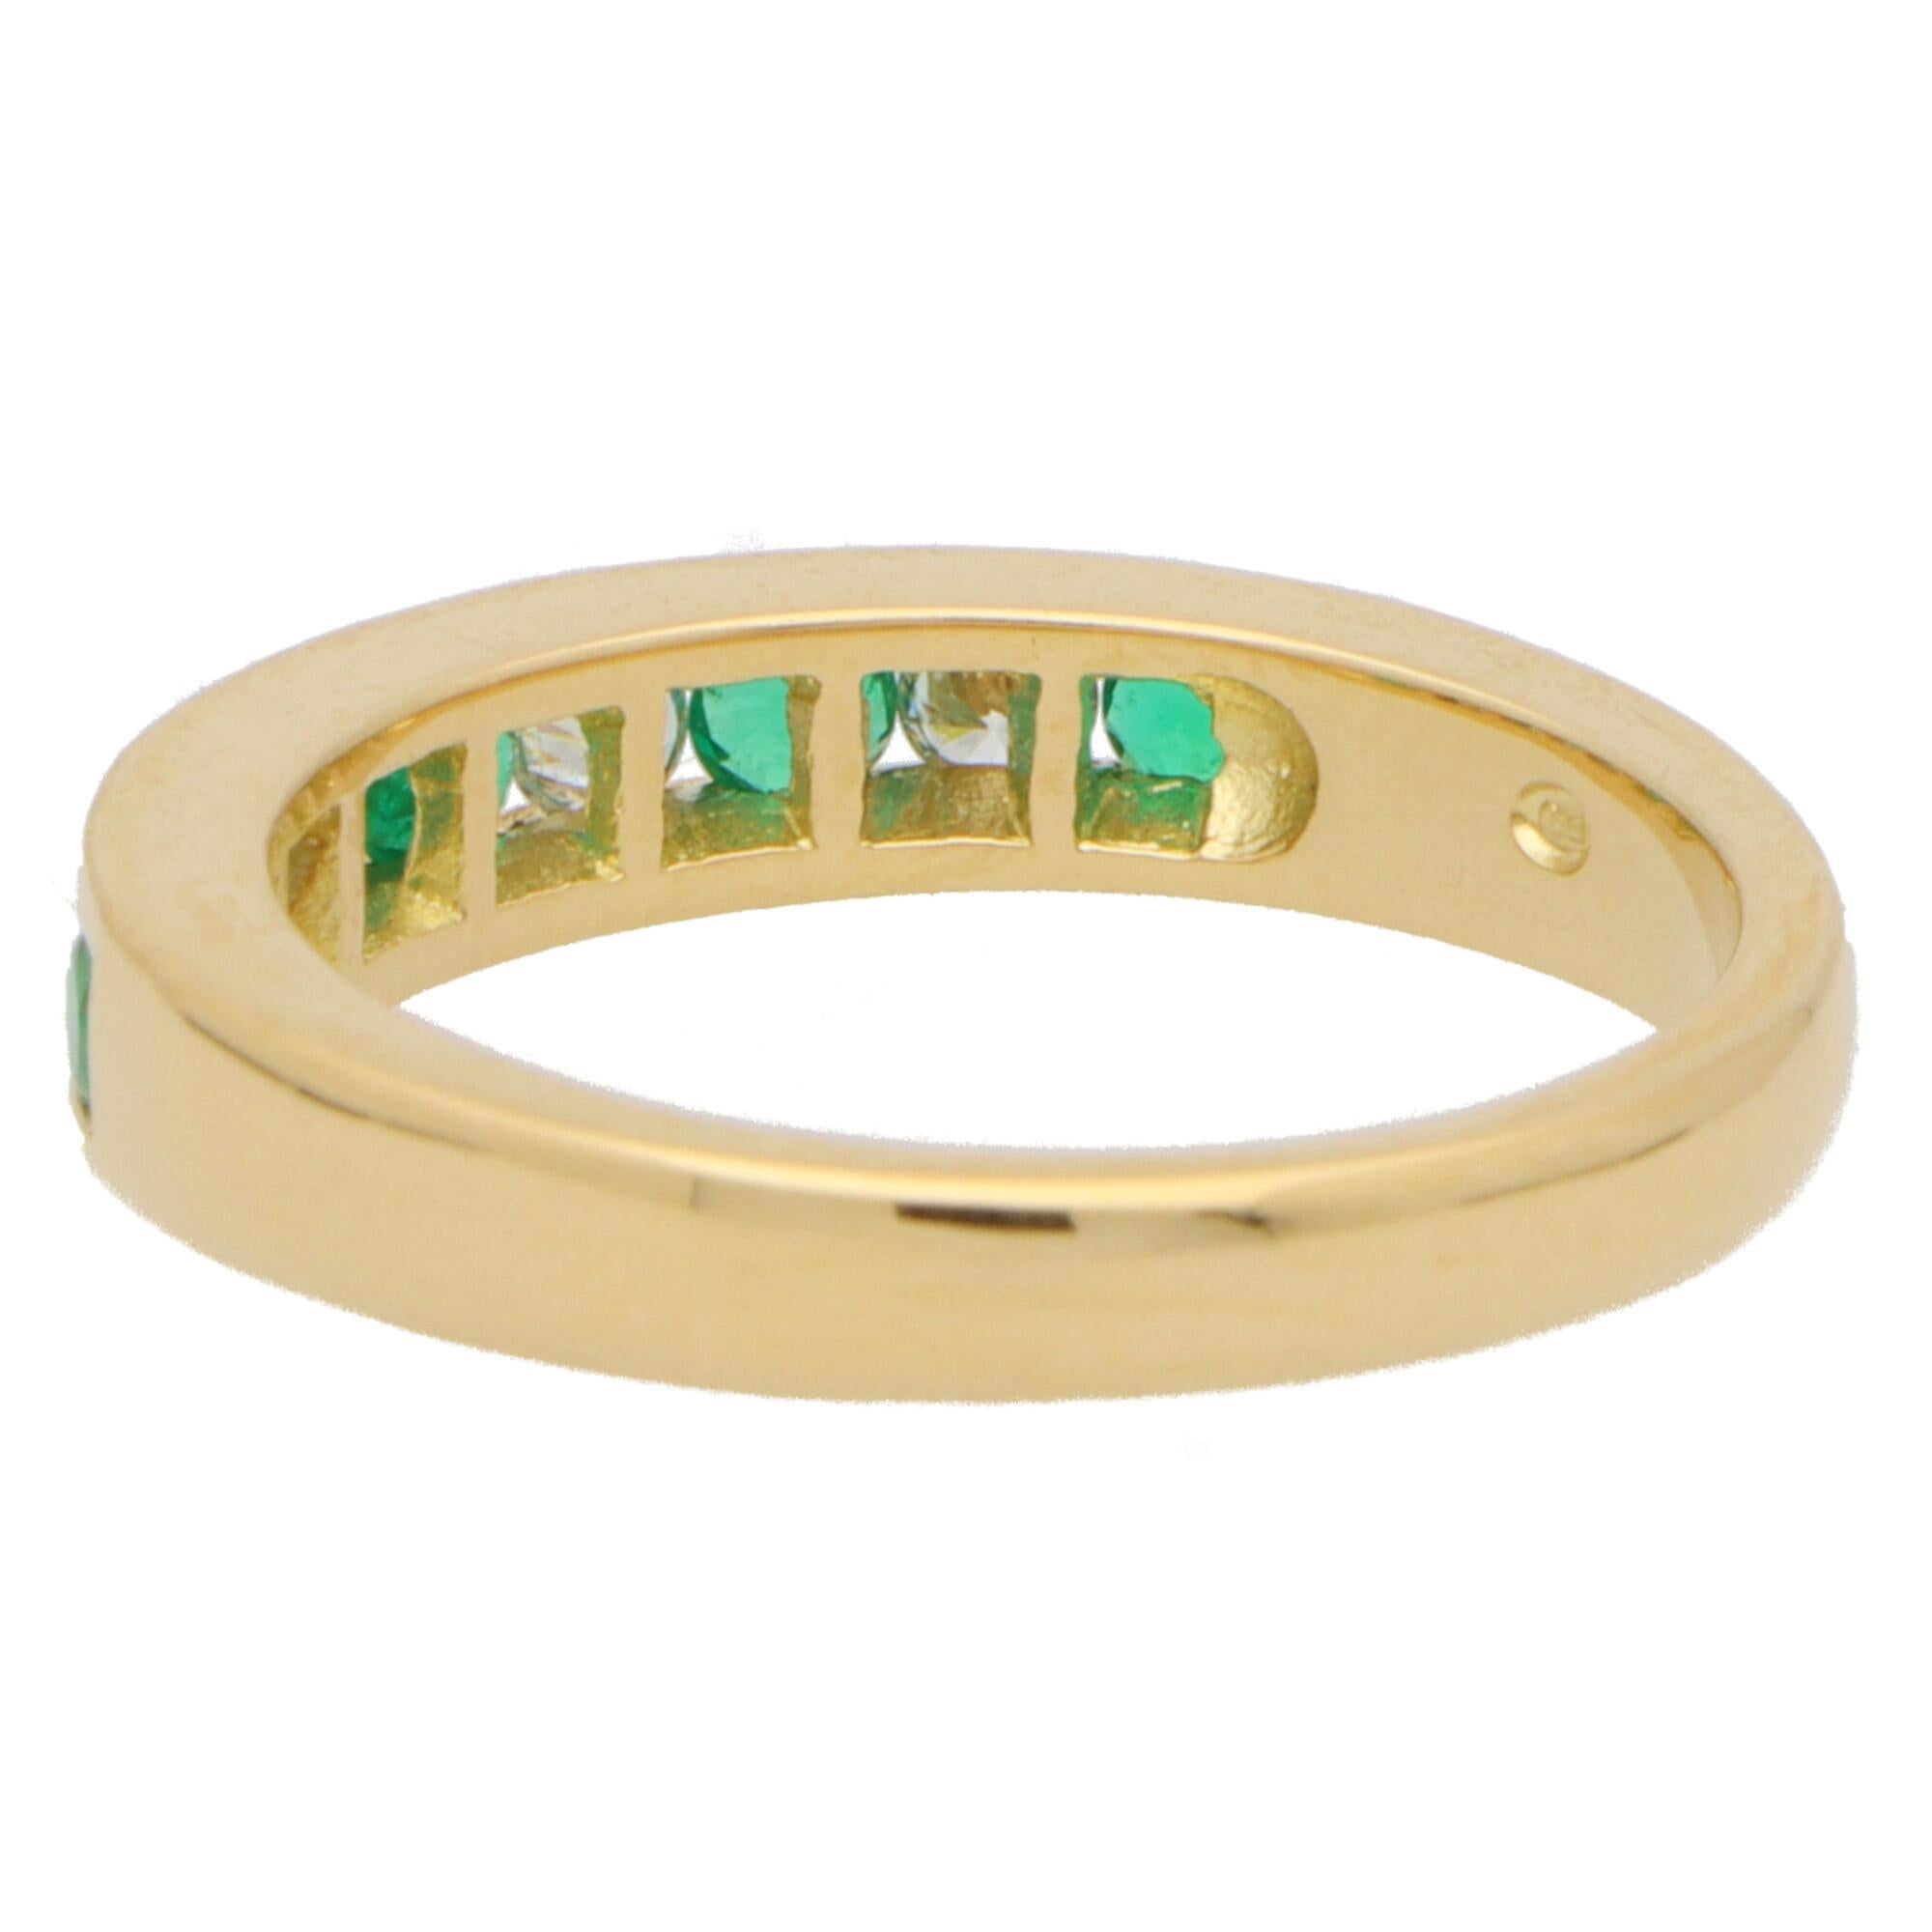 Round Cut Emerald and Diamond Half Eternity Band Ring Set in 18k Yellow Gold 